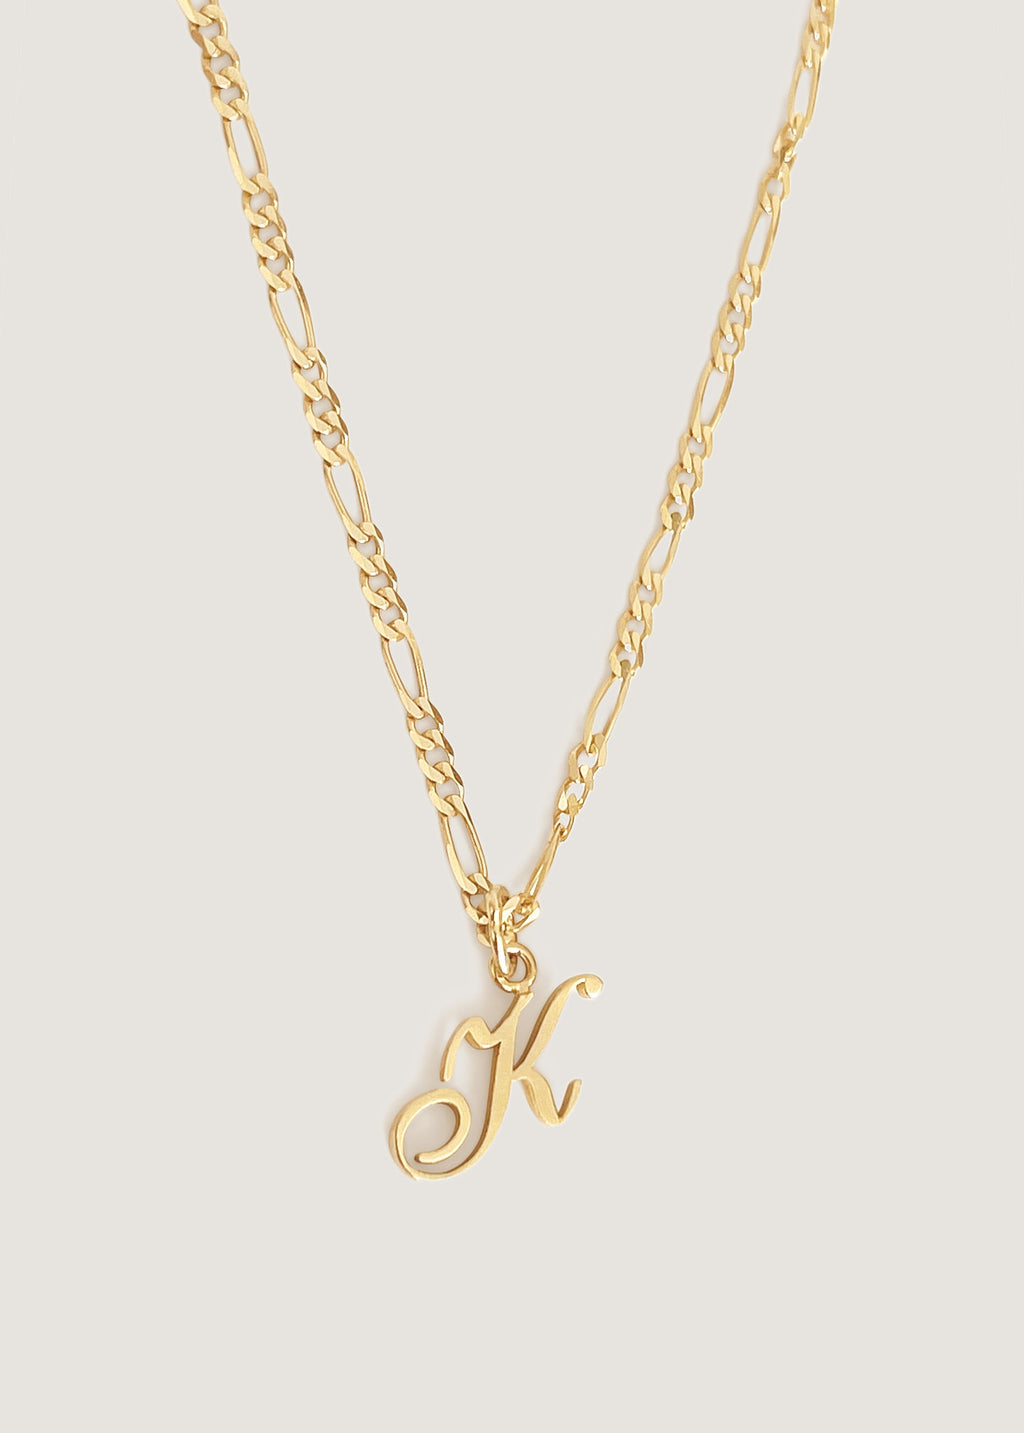 alt="Love Letter Charm Necklace - Figaro Chain"